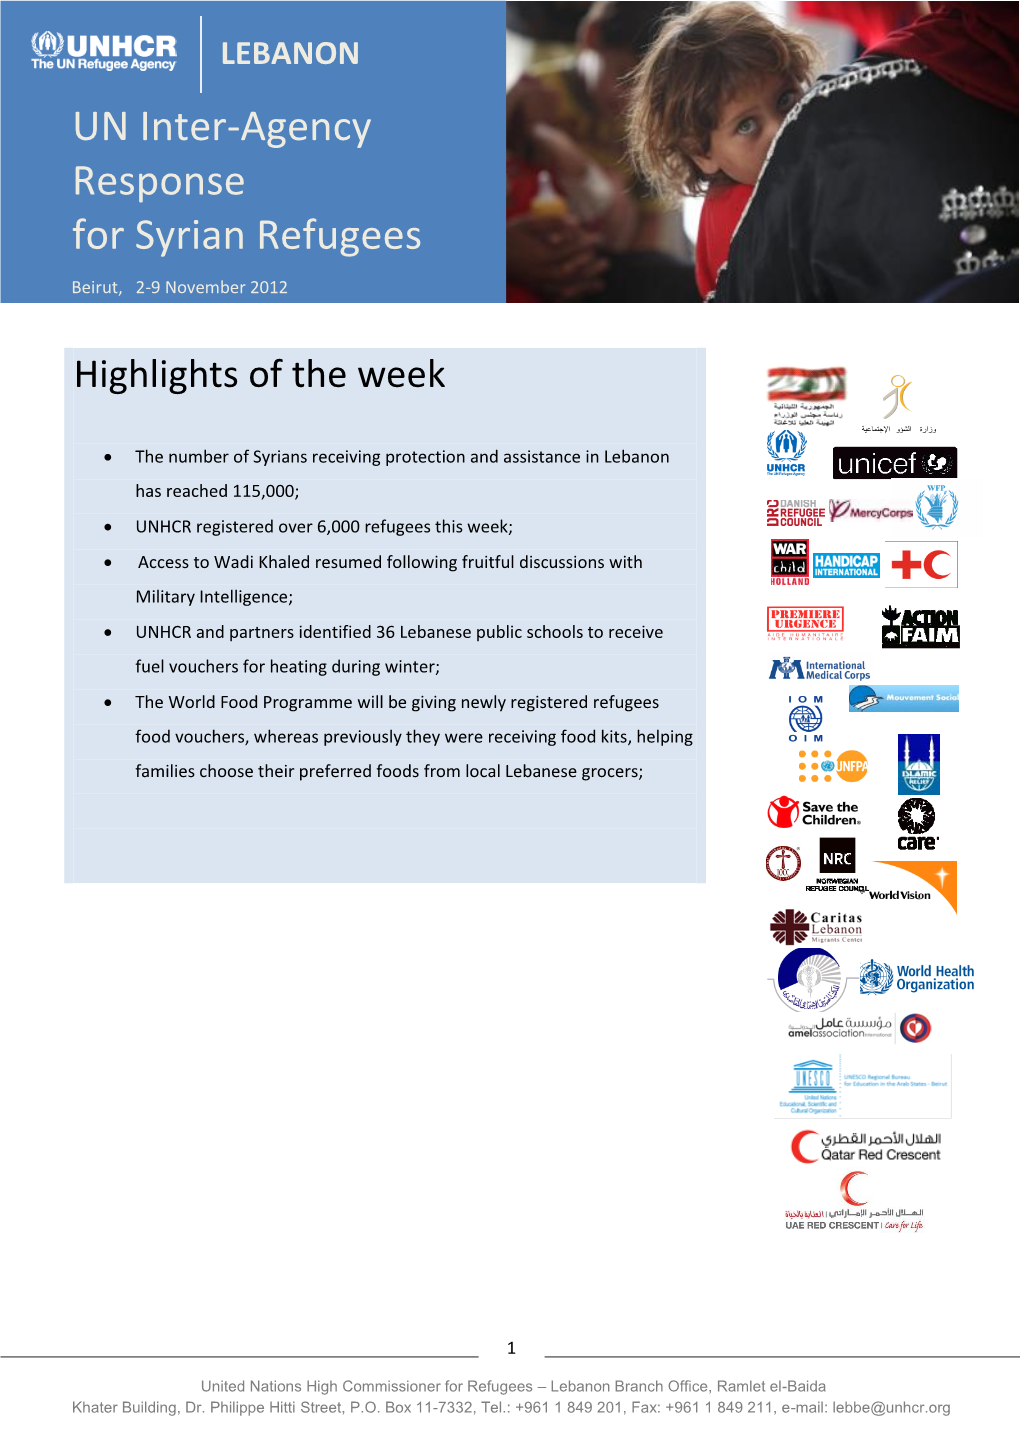 UN Inter-Agency Response for Syrian Refugees